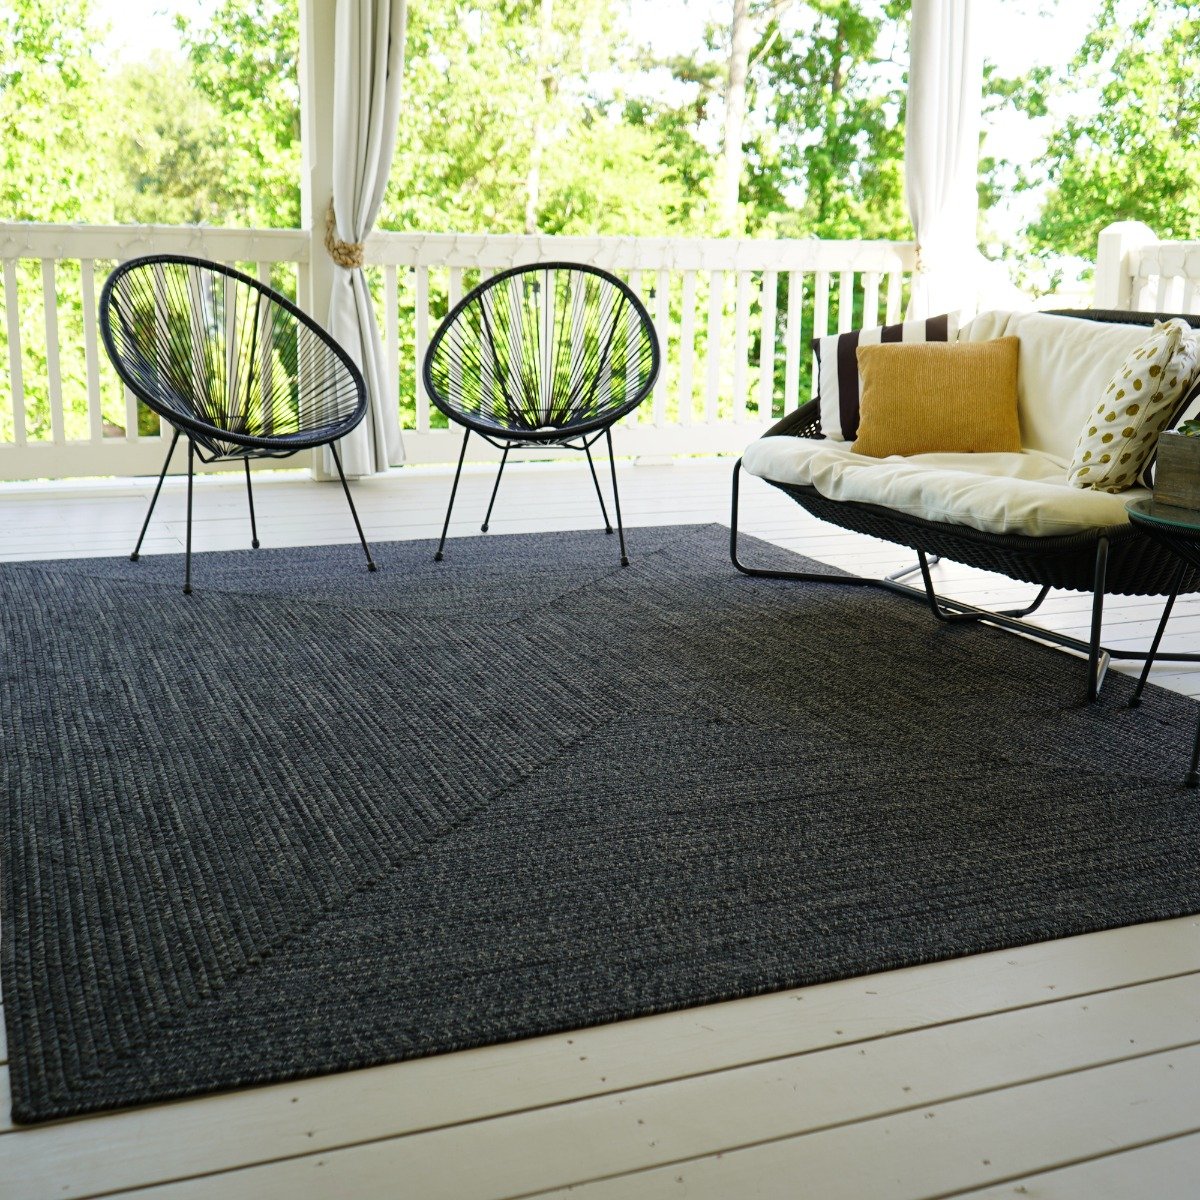 Rainforest Oval Braided Rug and Pet Friendly Rugs Washable 20x30, The  Perfect Indoor Outdoor Rugs by Homespice